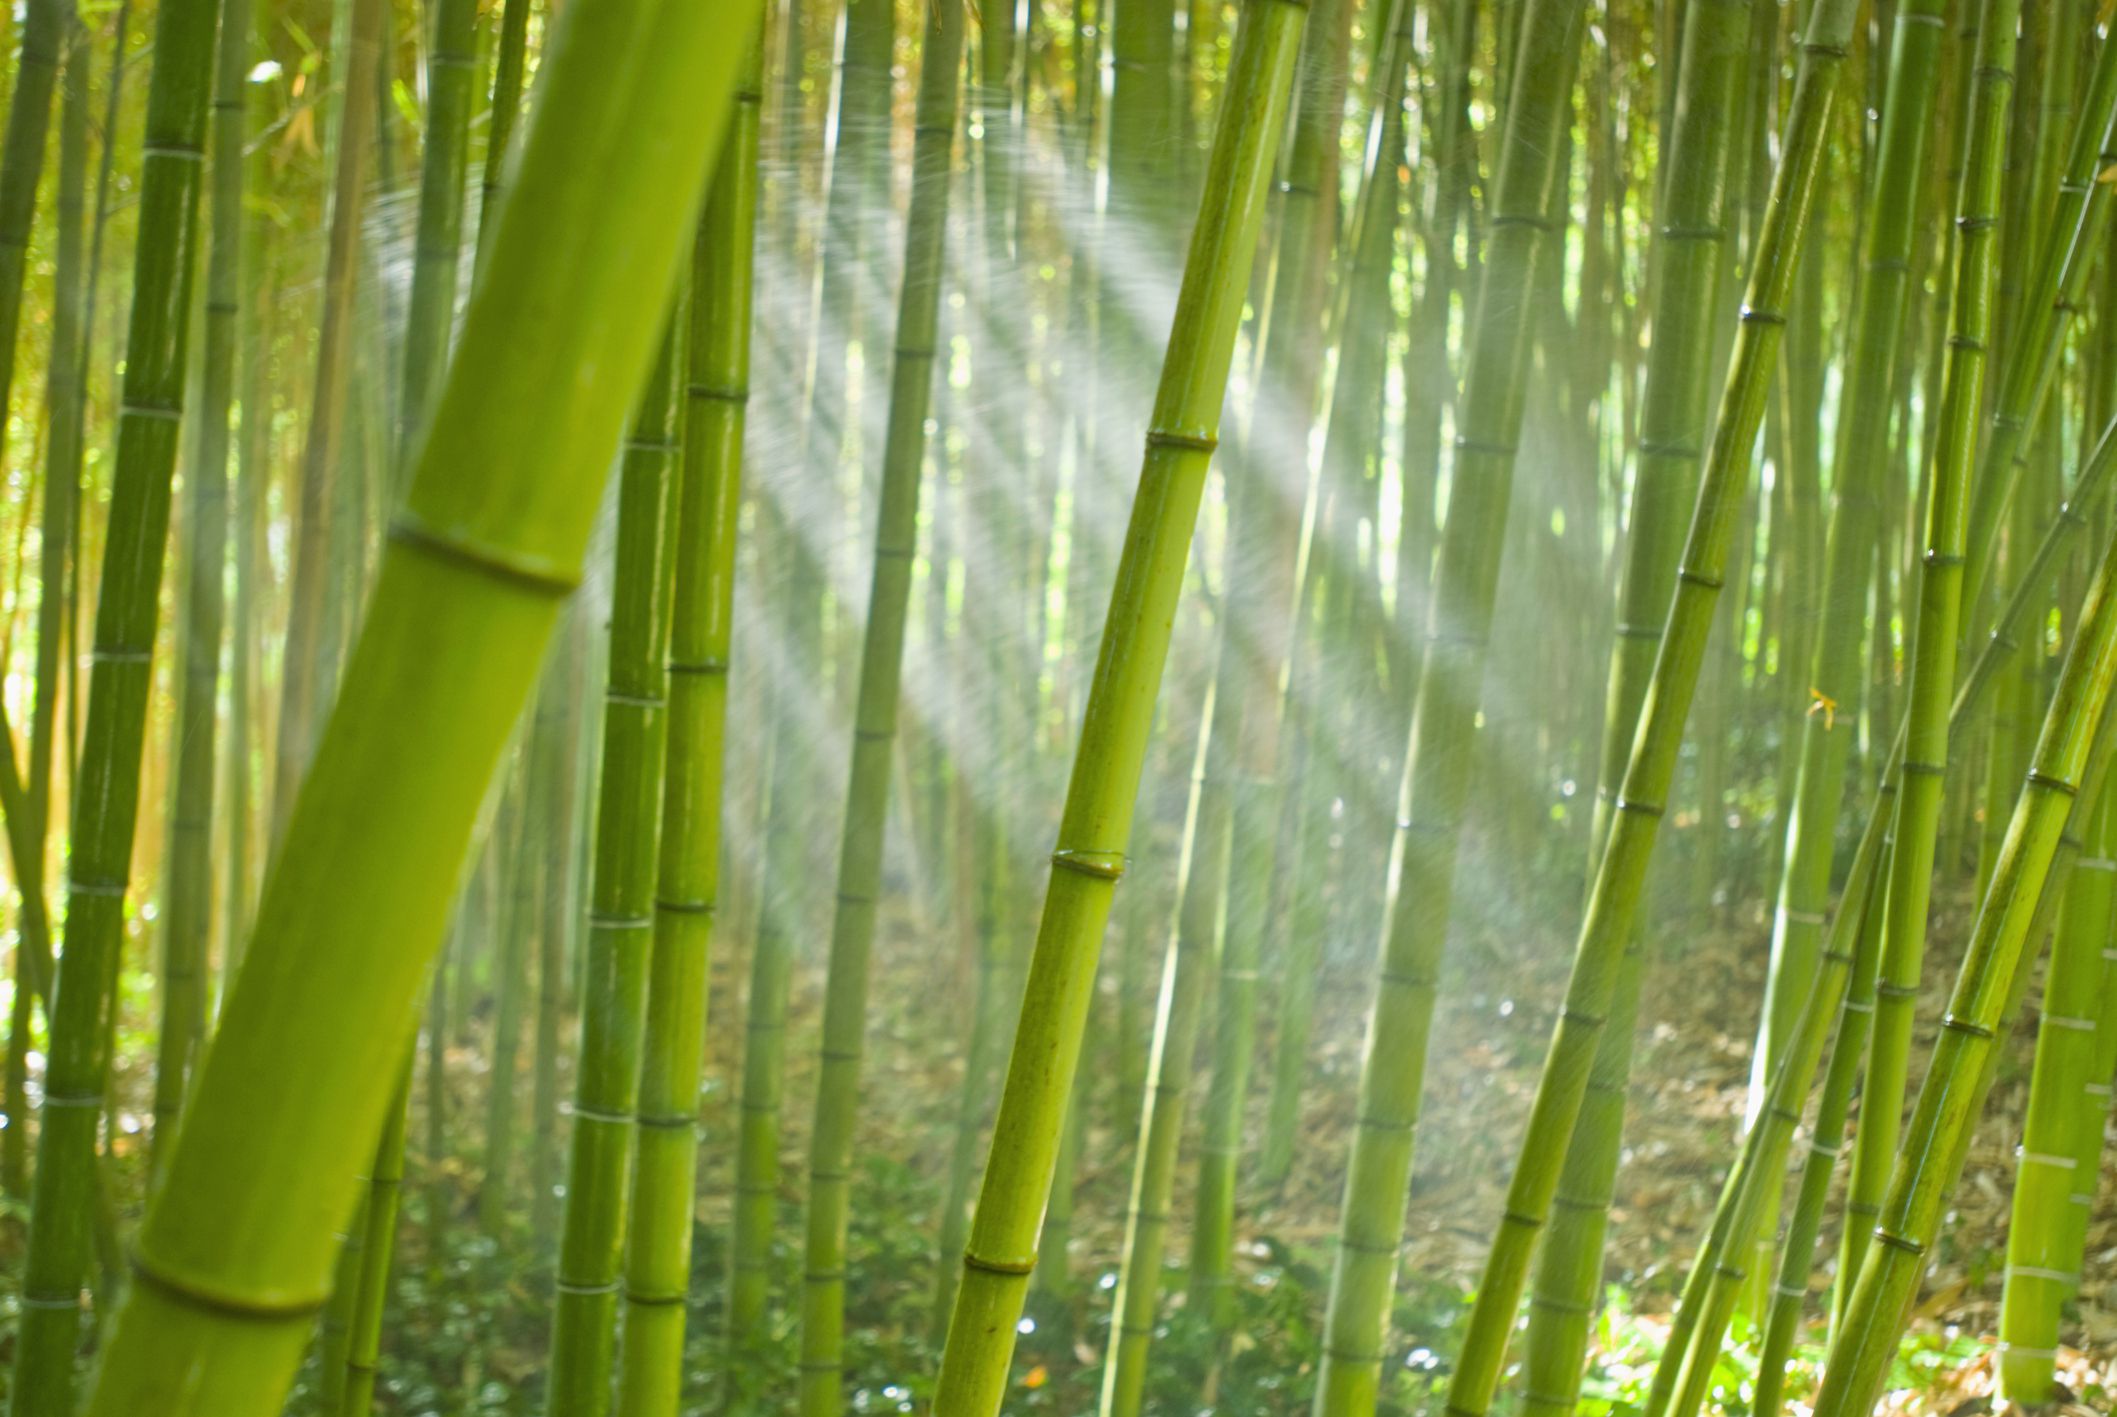 Bamboo Removal - Eradicating Bamboo Without Herbicides